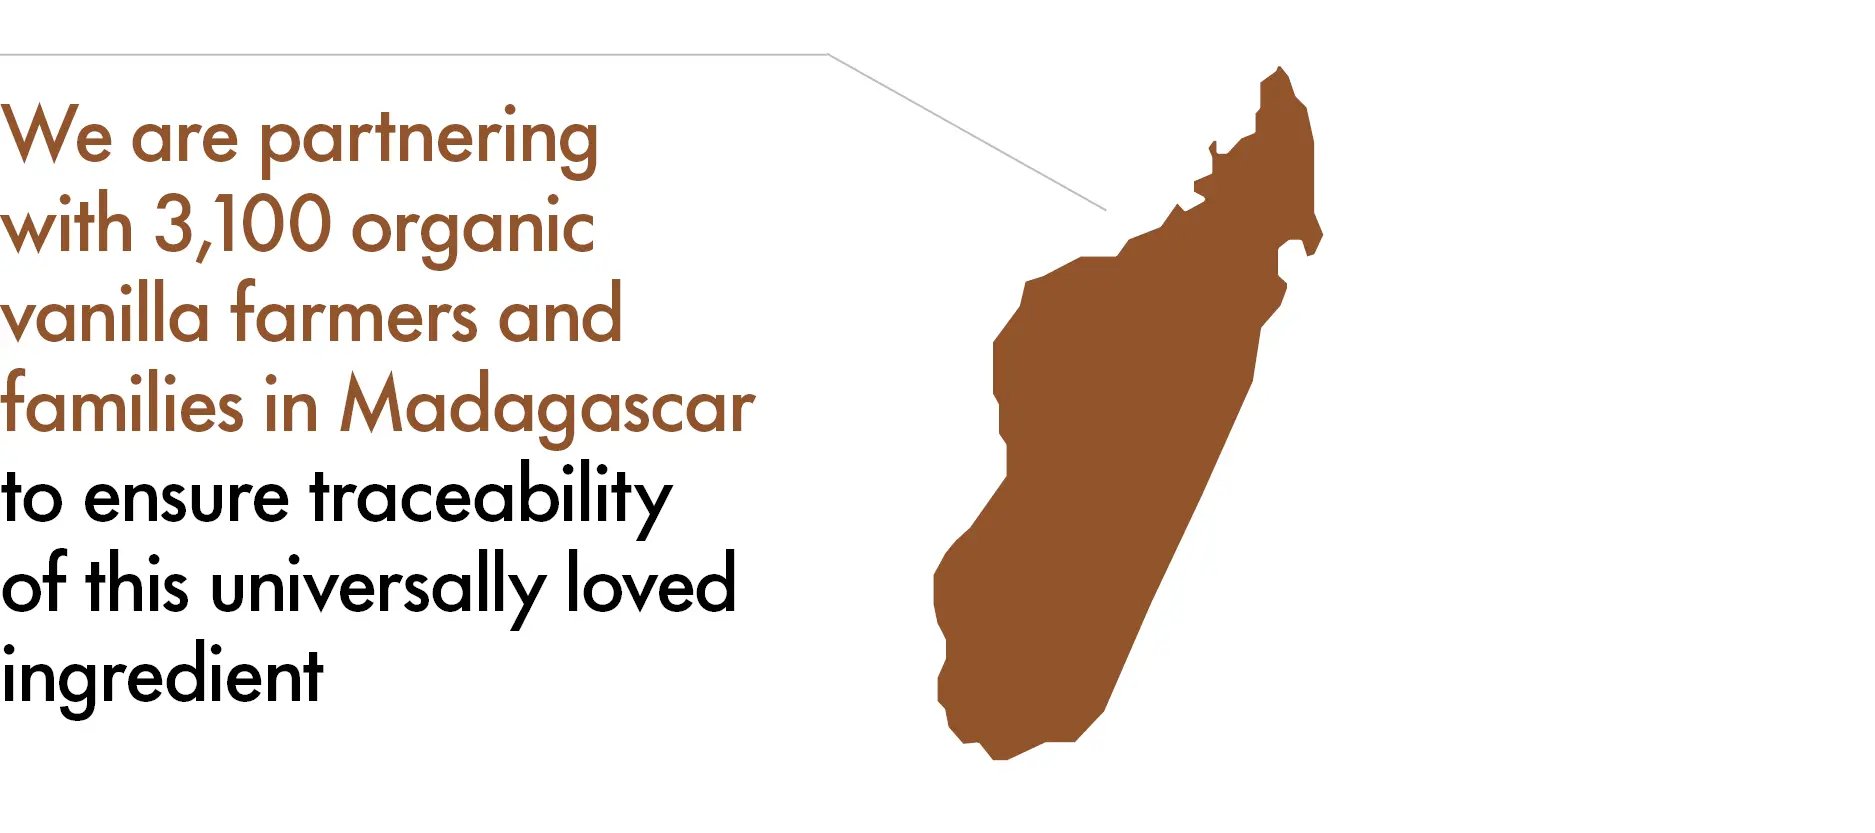 We are partnering with 3,100 organic vanilla farmers and families in Madagascar 